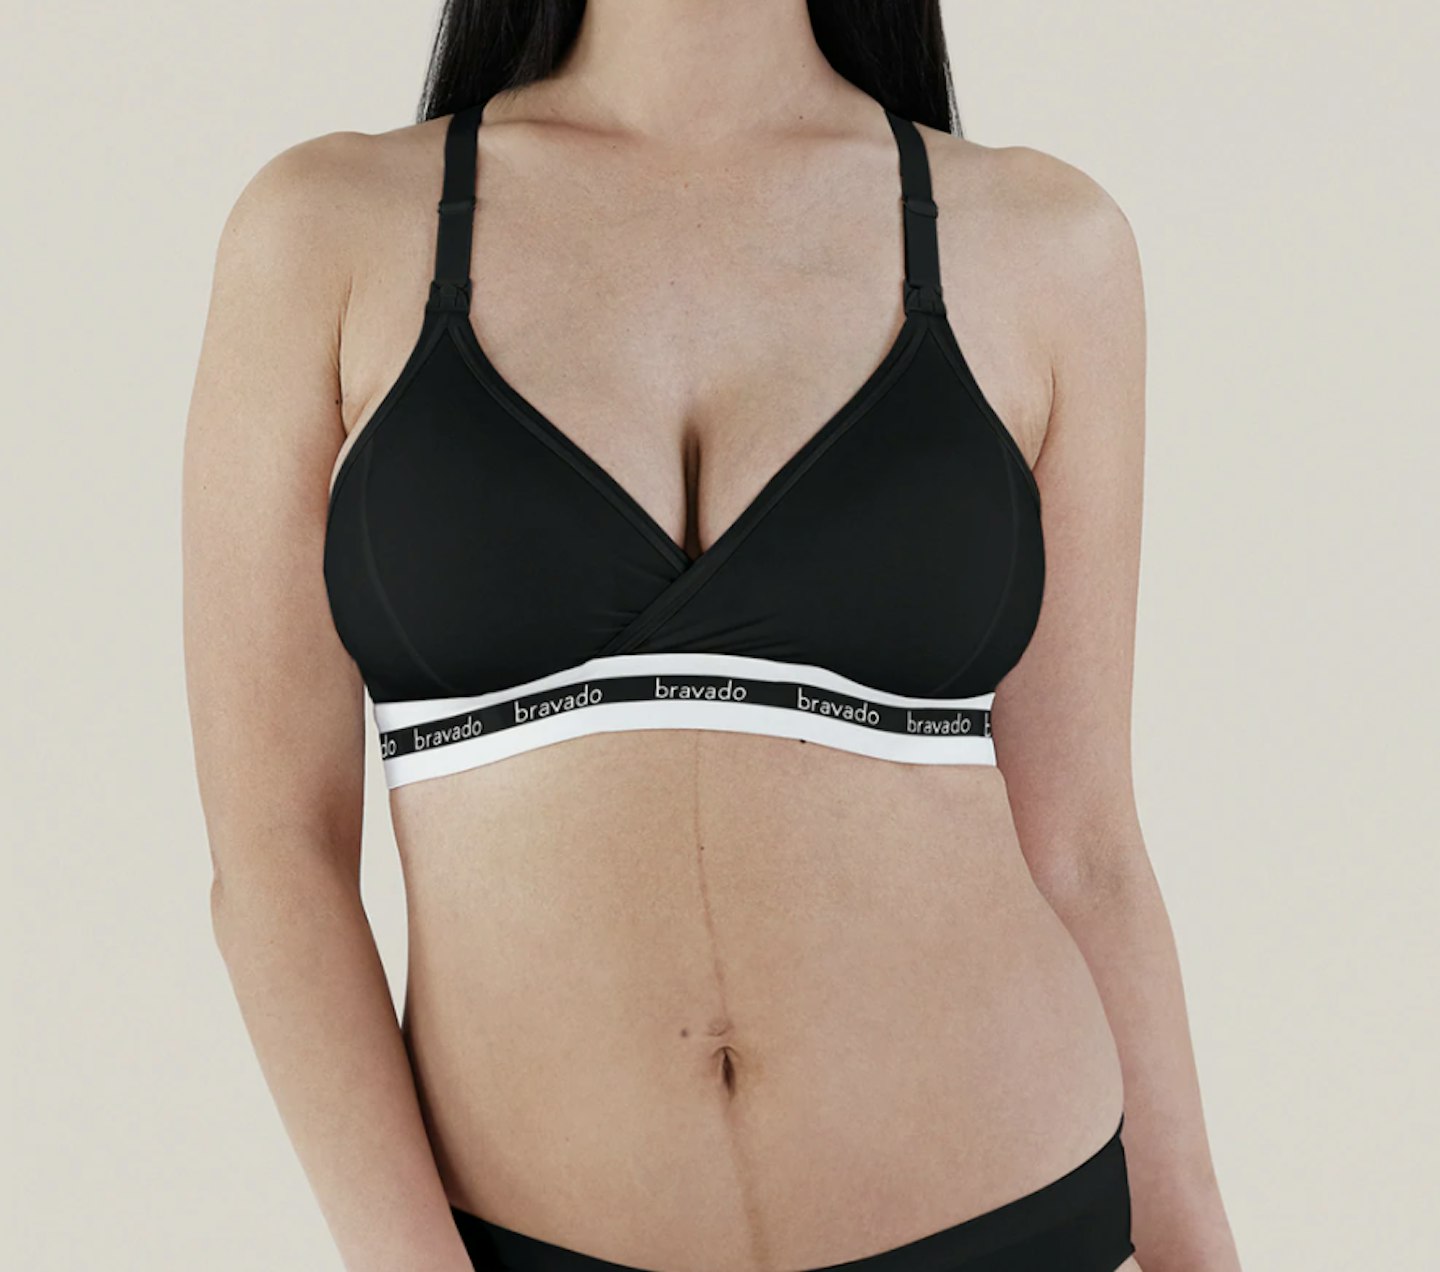 When should you choose your maternity bra?